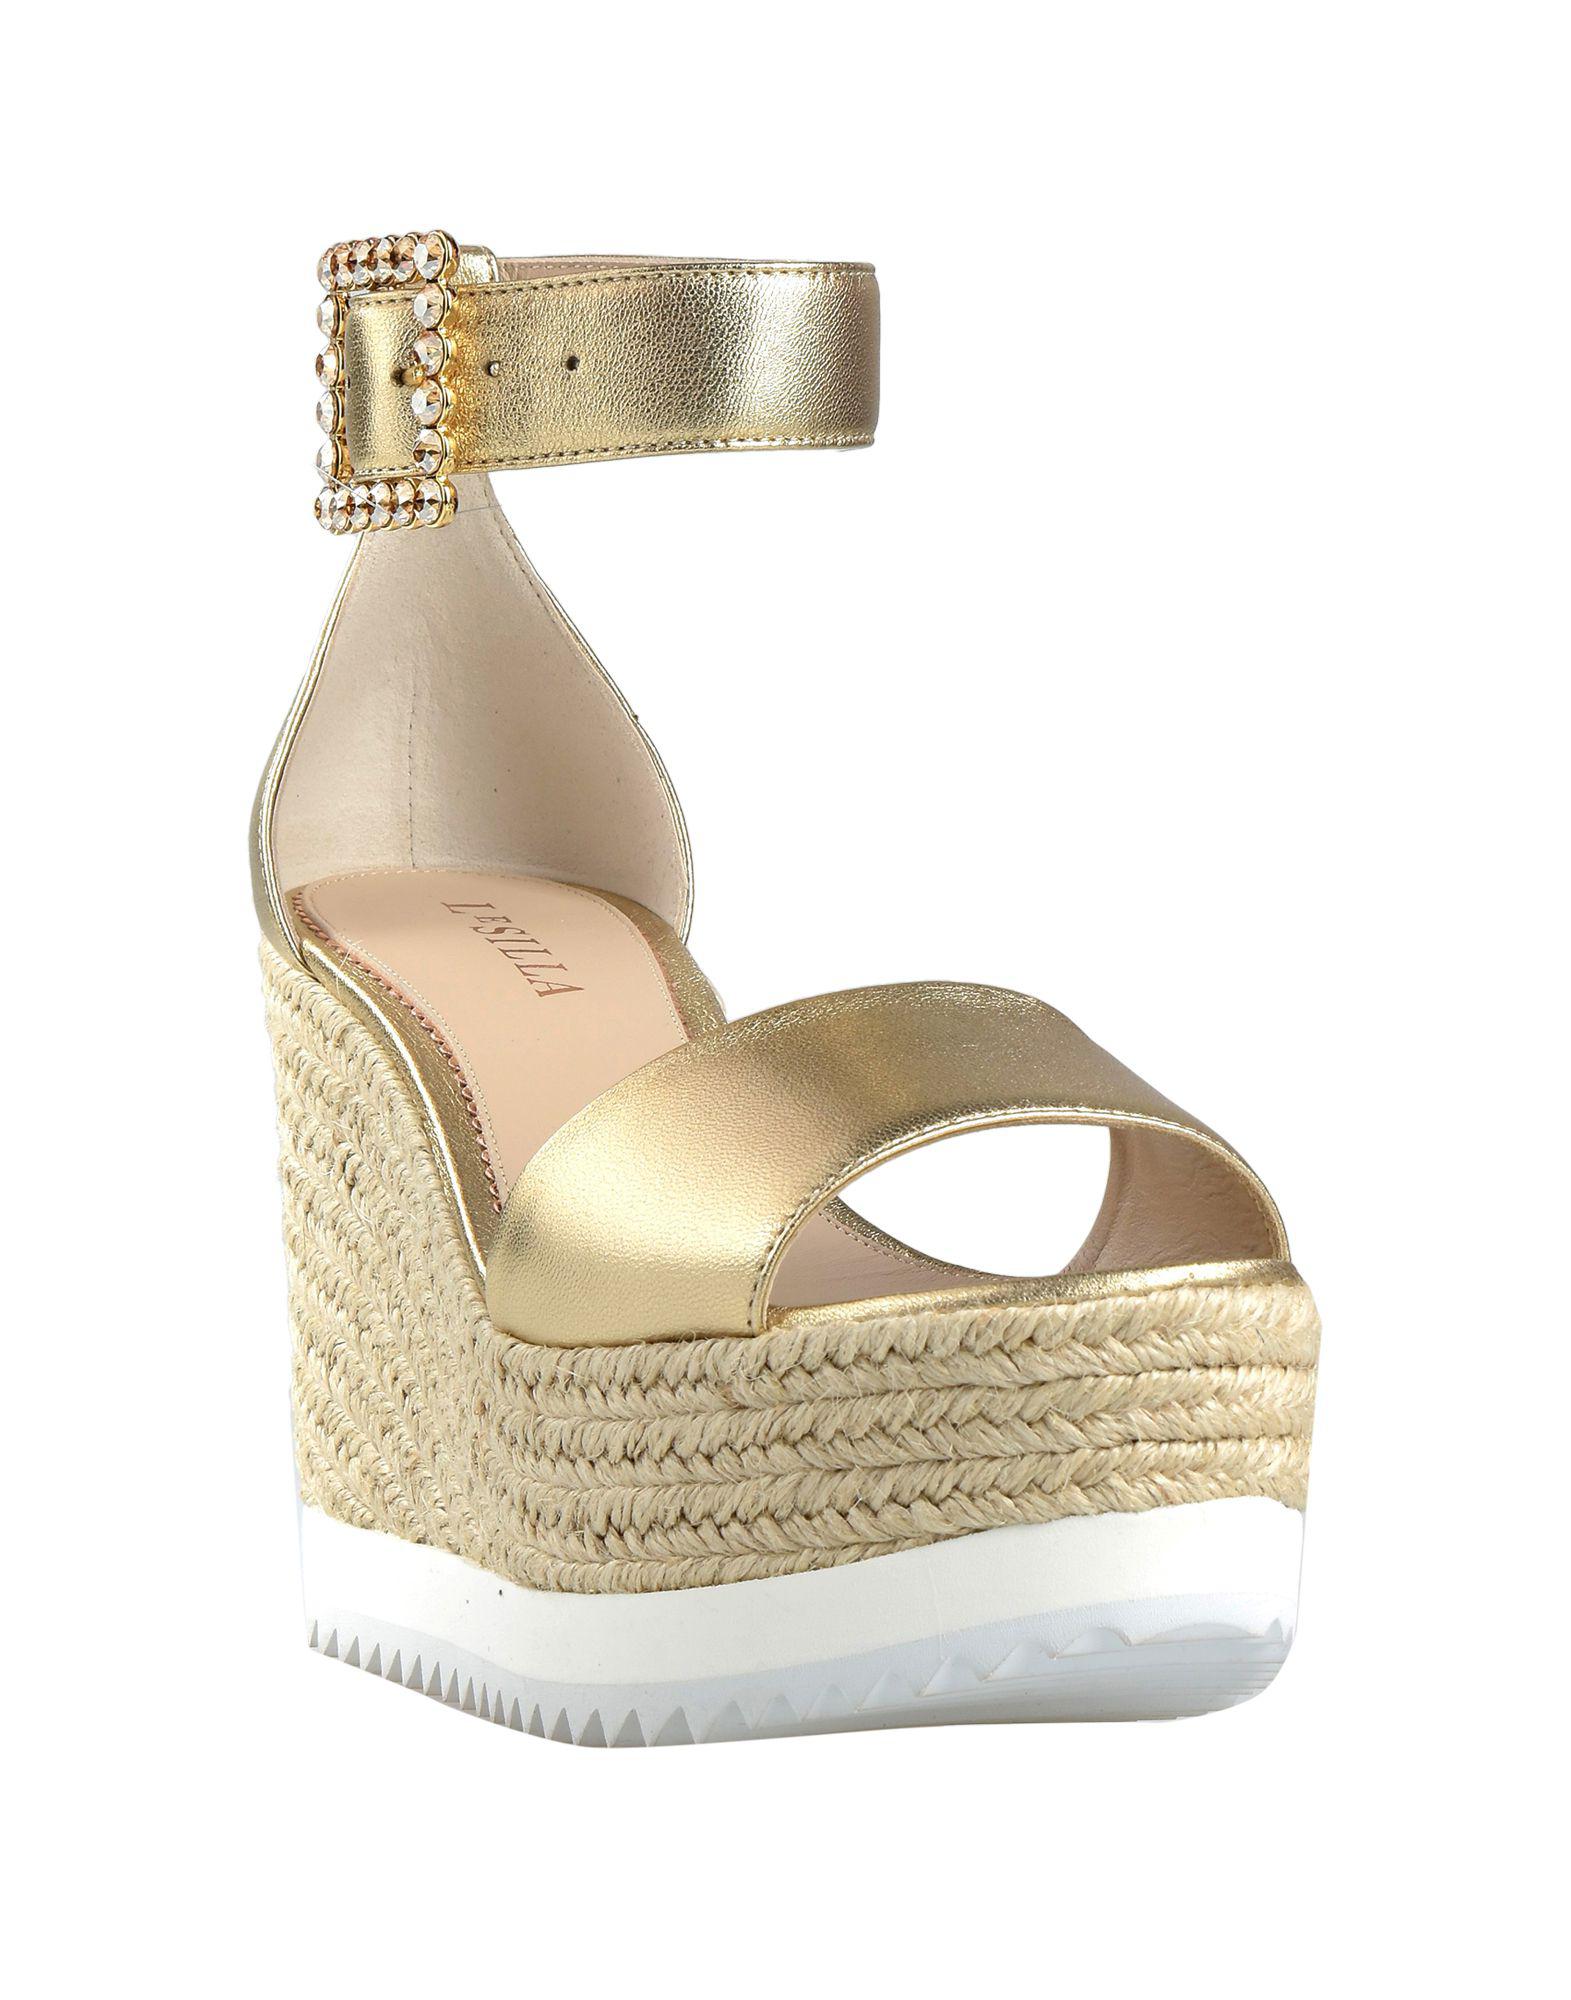 Le Silla Leather Sandals in Gold (Metallic) - Lyst